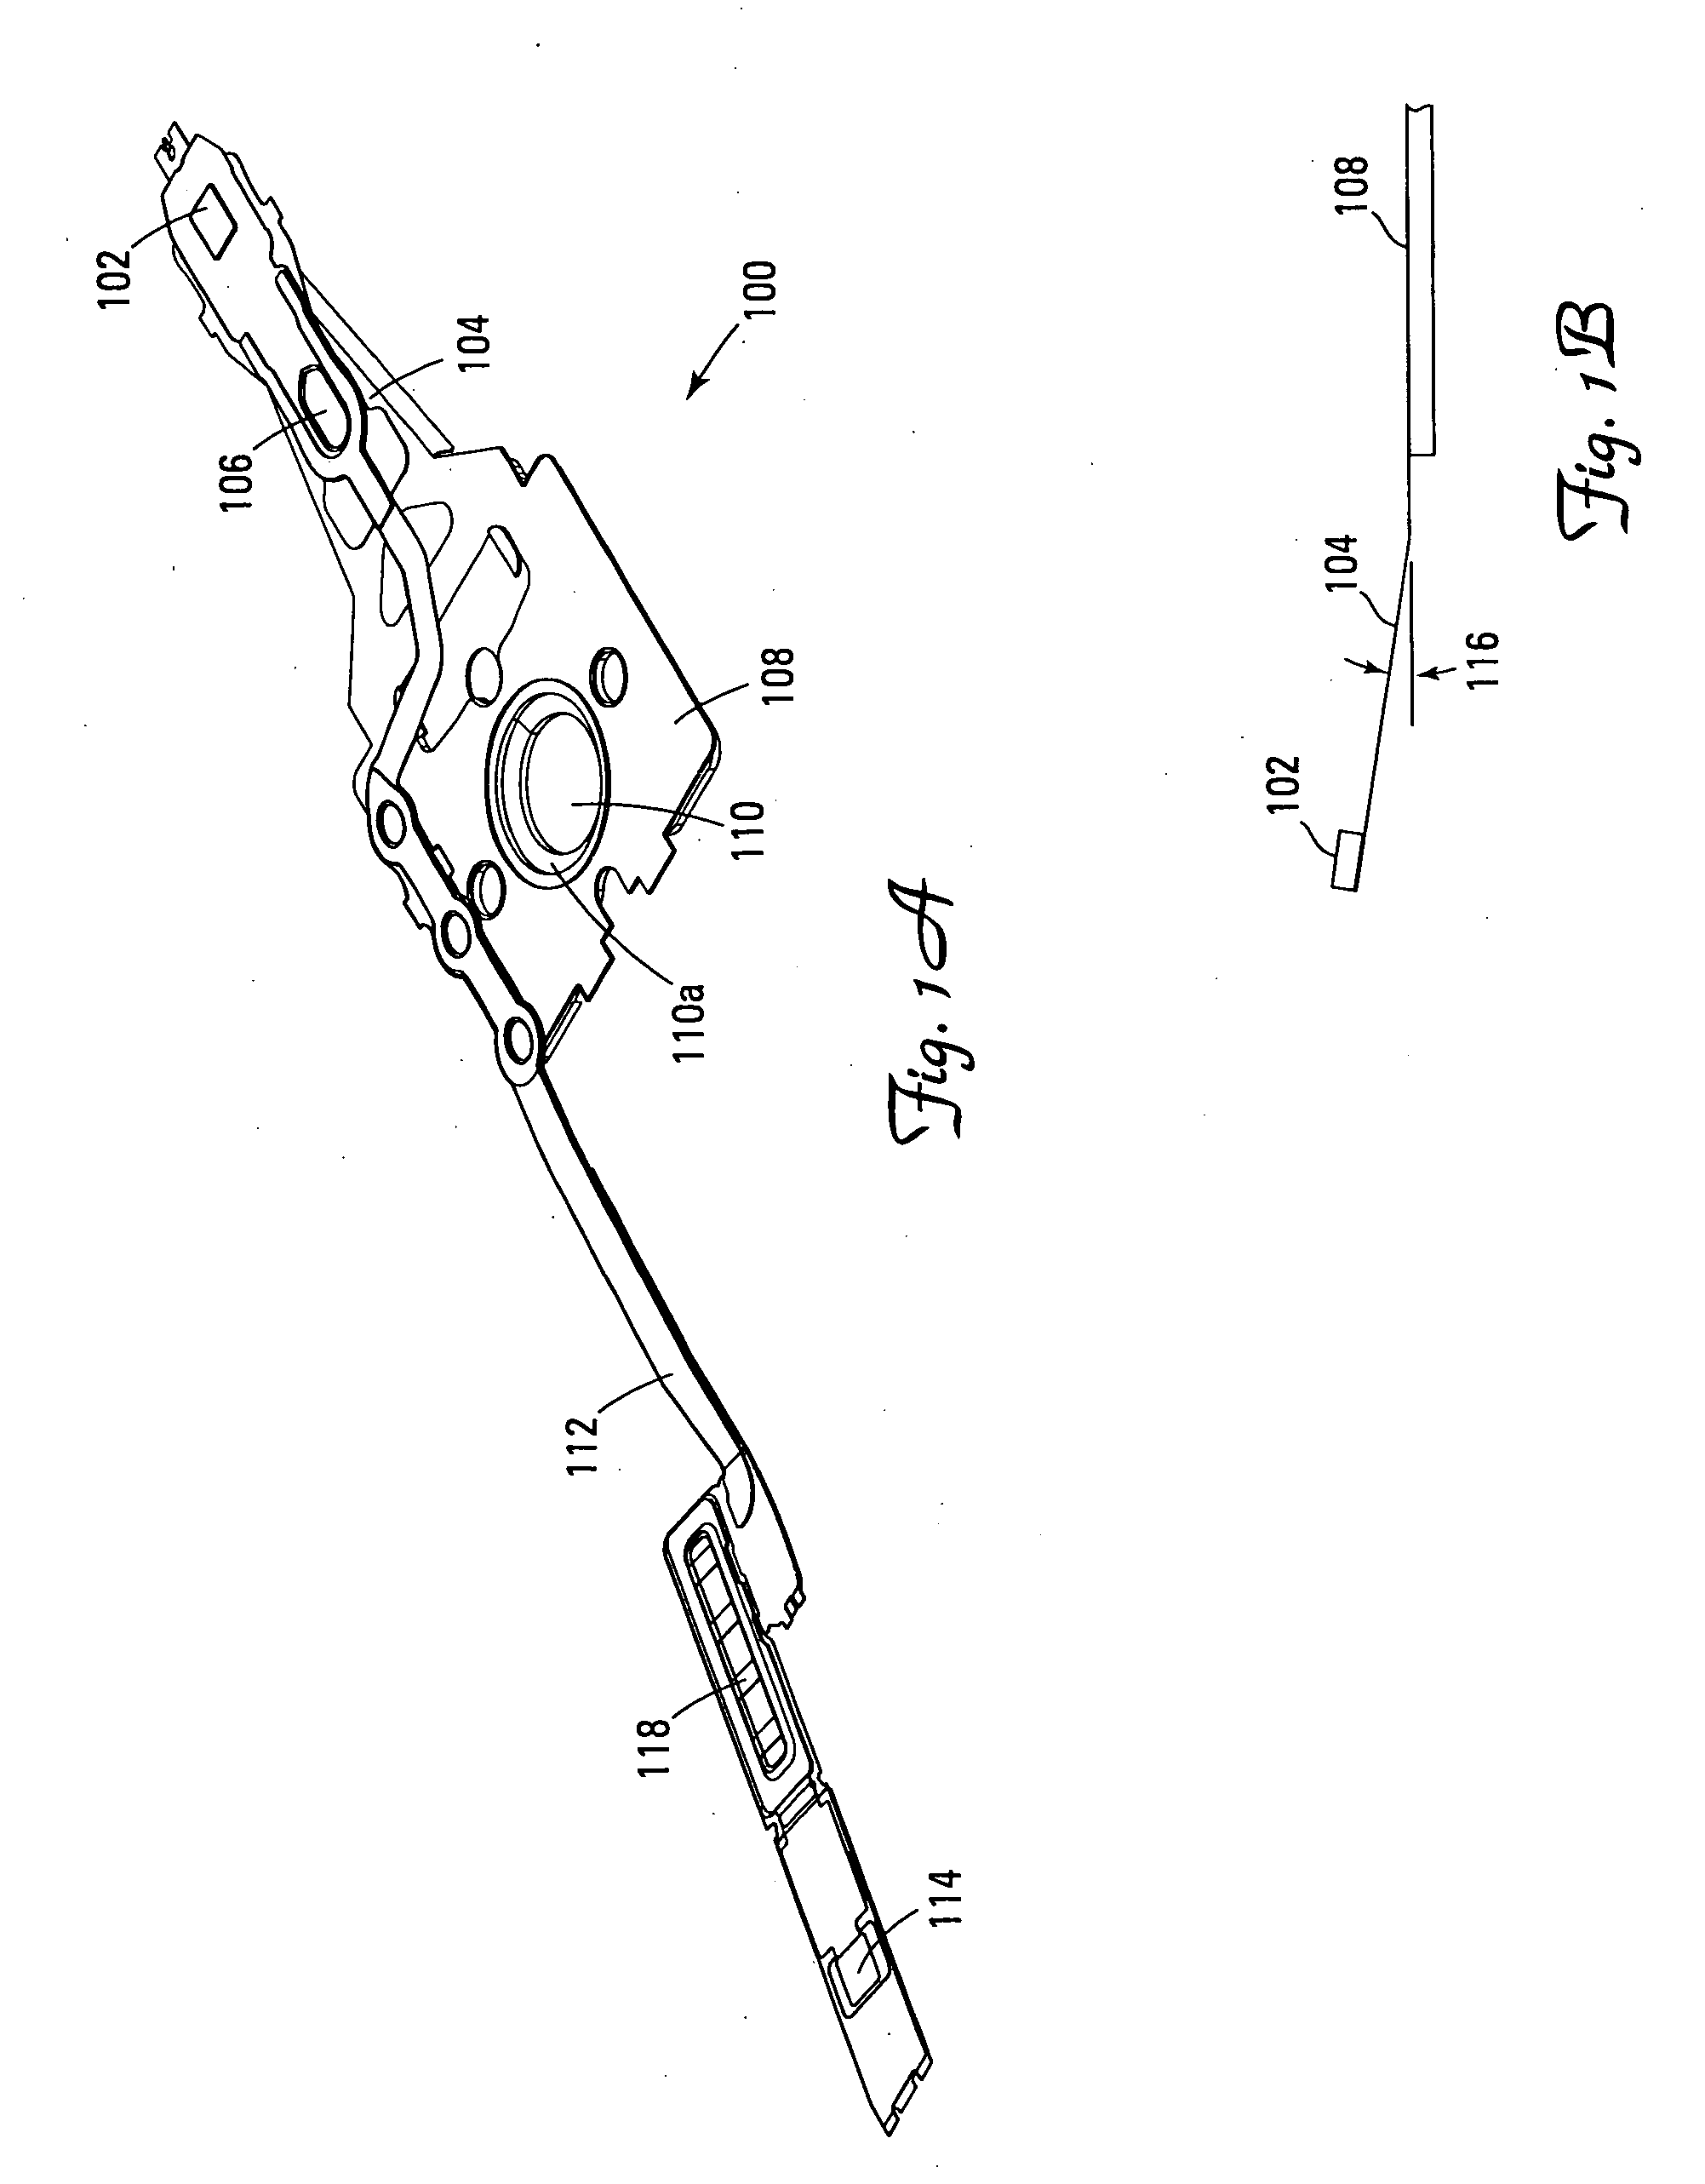 Method and apparatus for head gimbal assembly testing